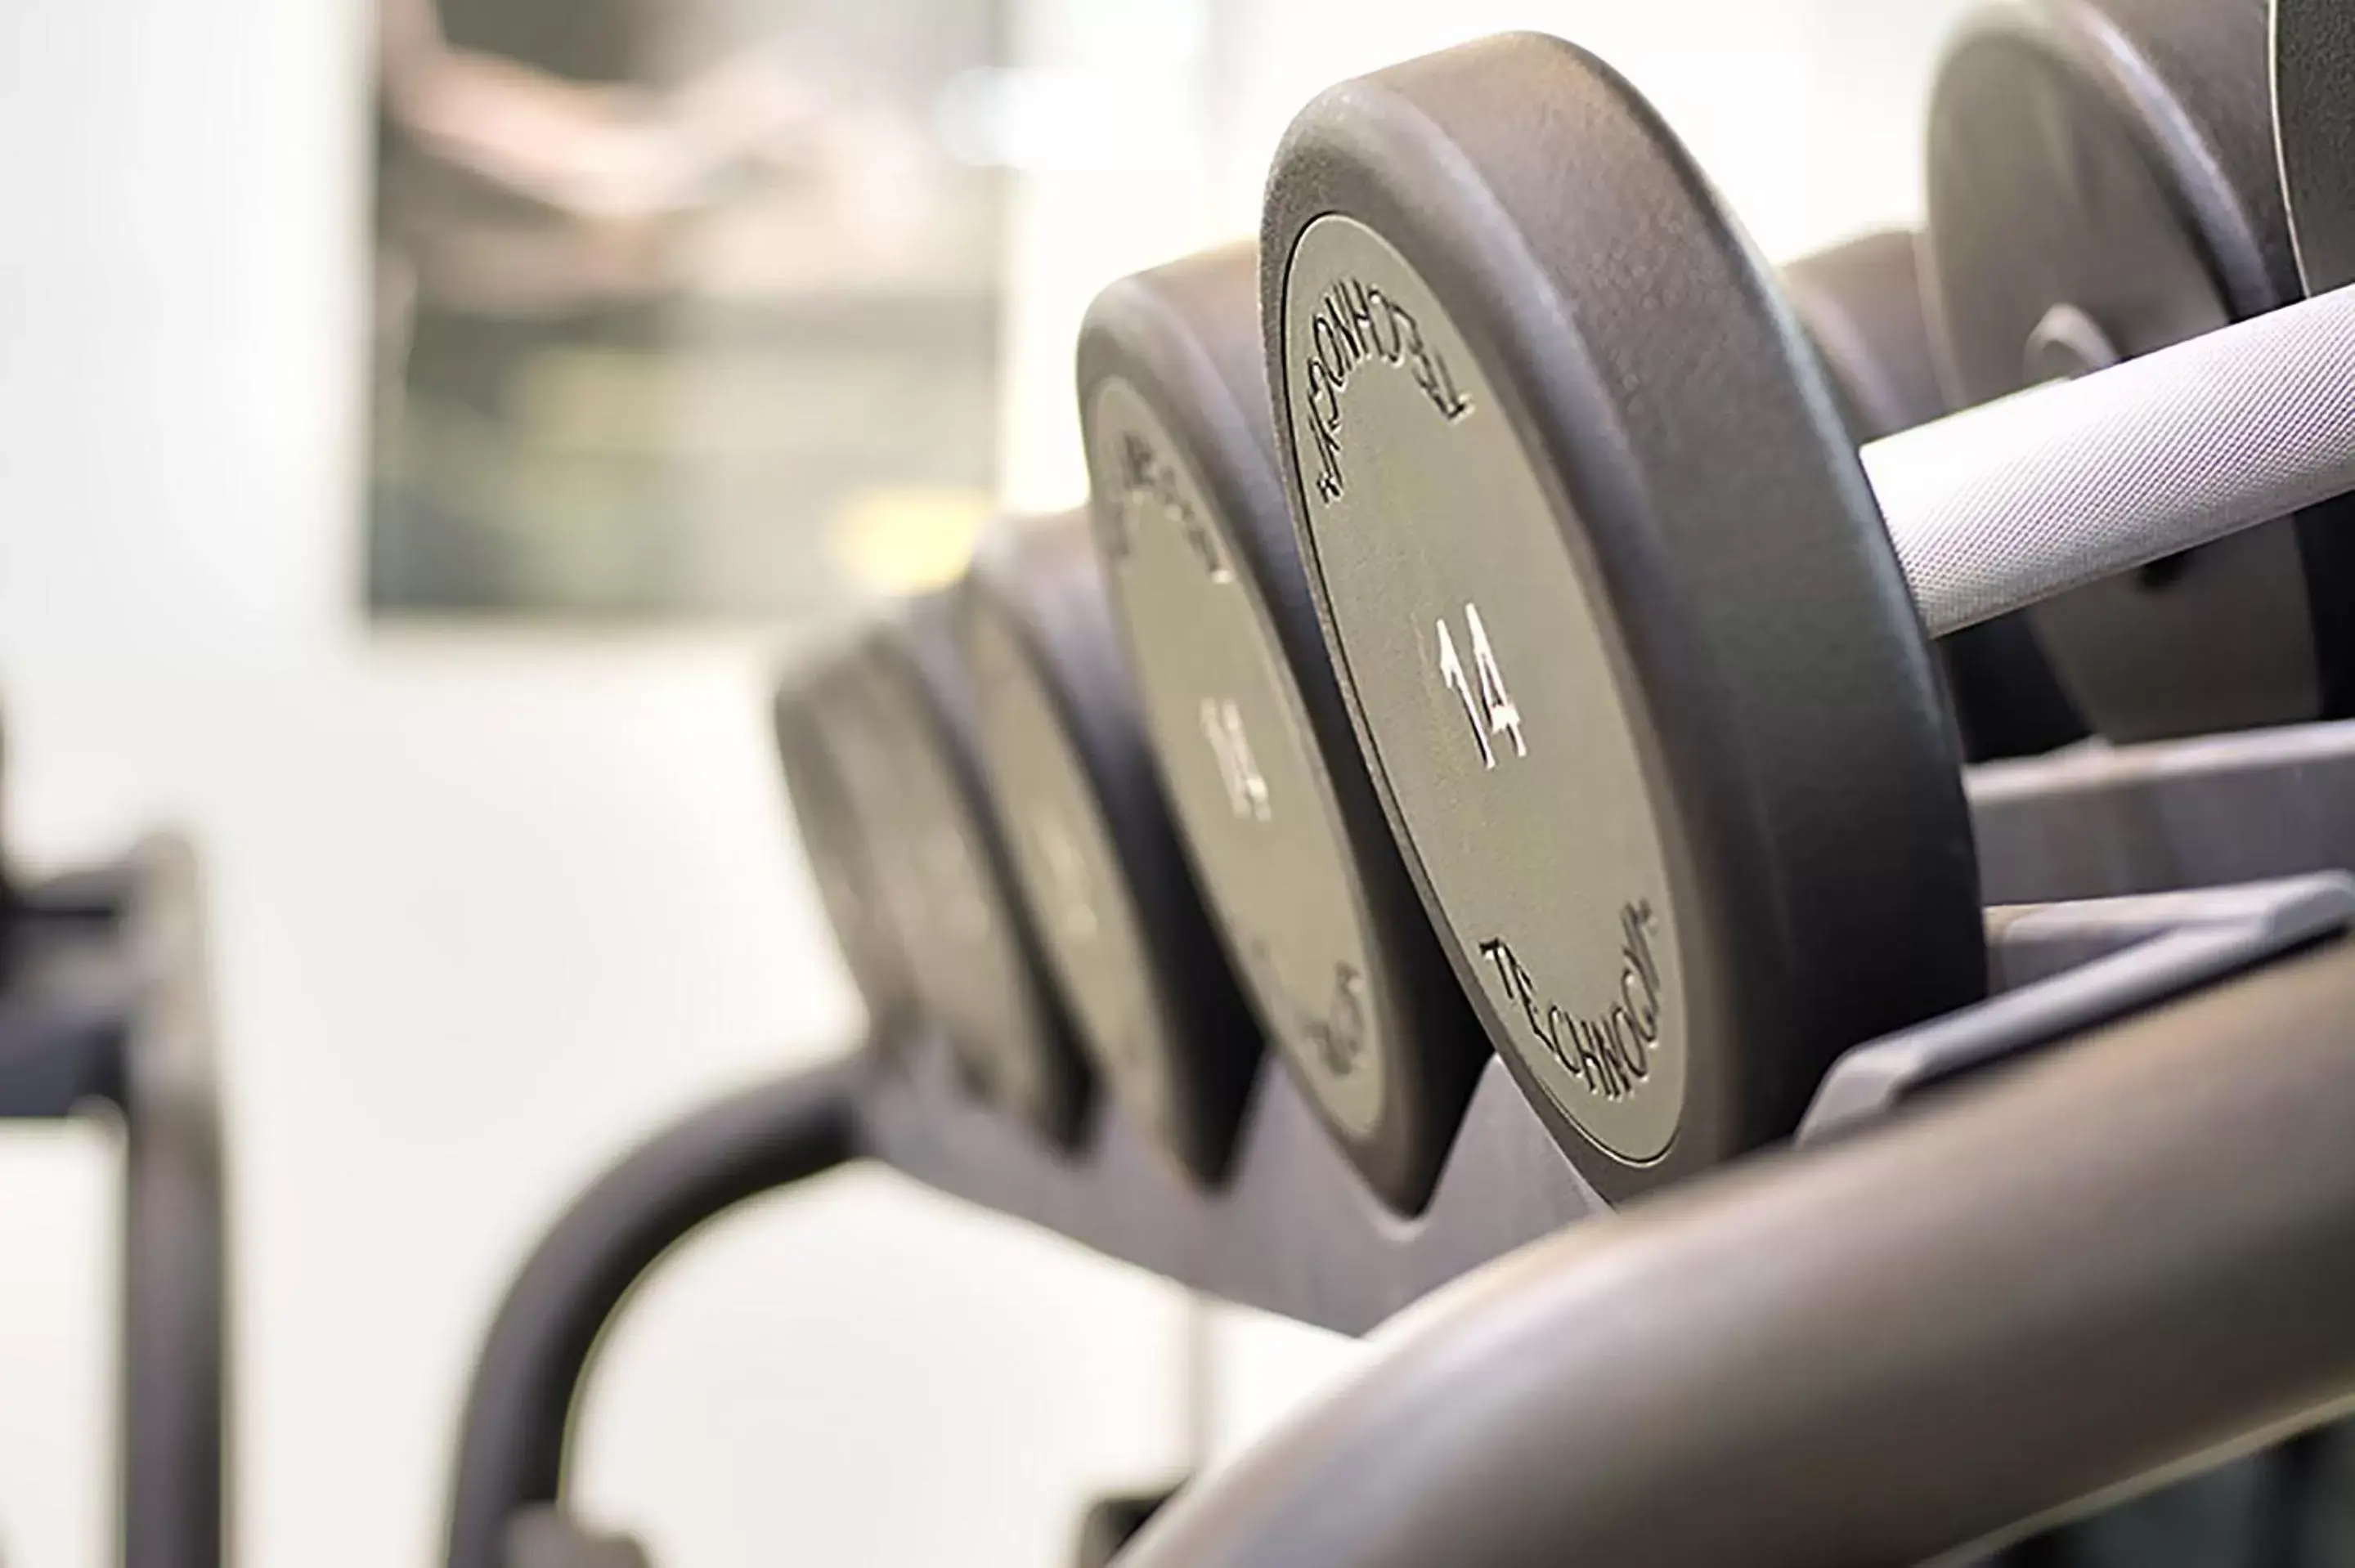 Fitness centre/facilities, Fitness Center/Facilities in J5 RIMAL Hotel Apartments